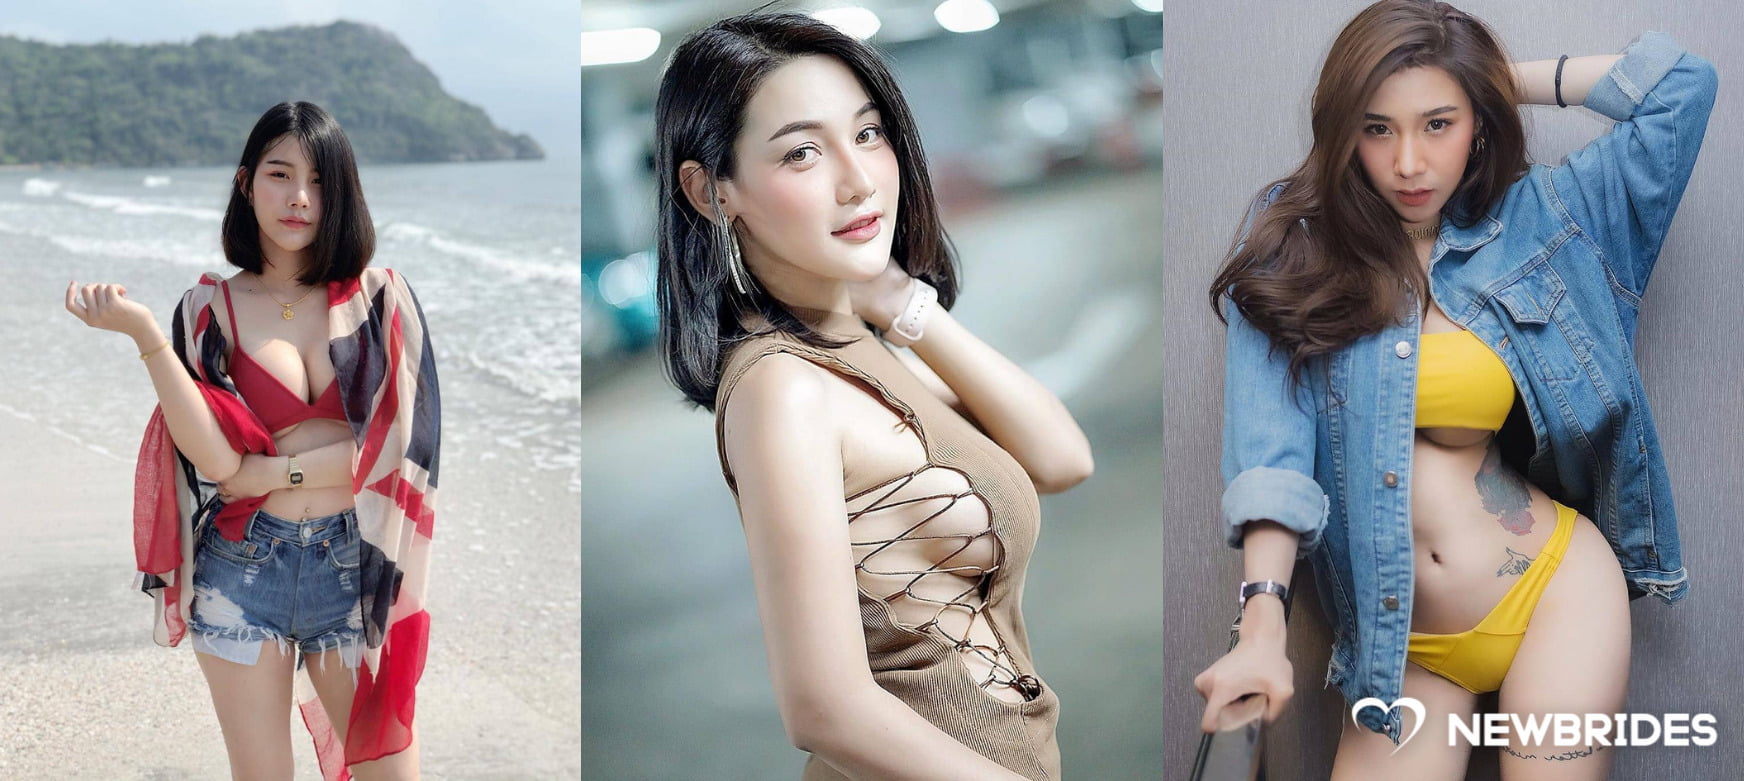 dana andersson recommends the hottest asian woman pic